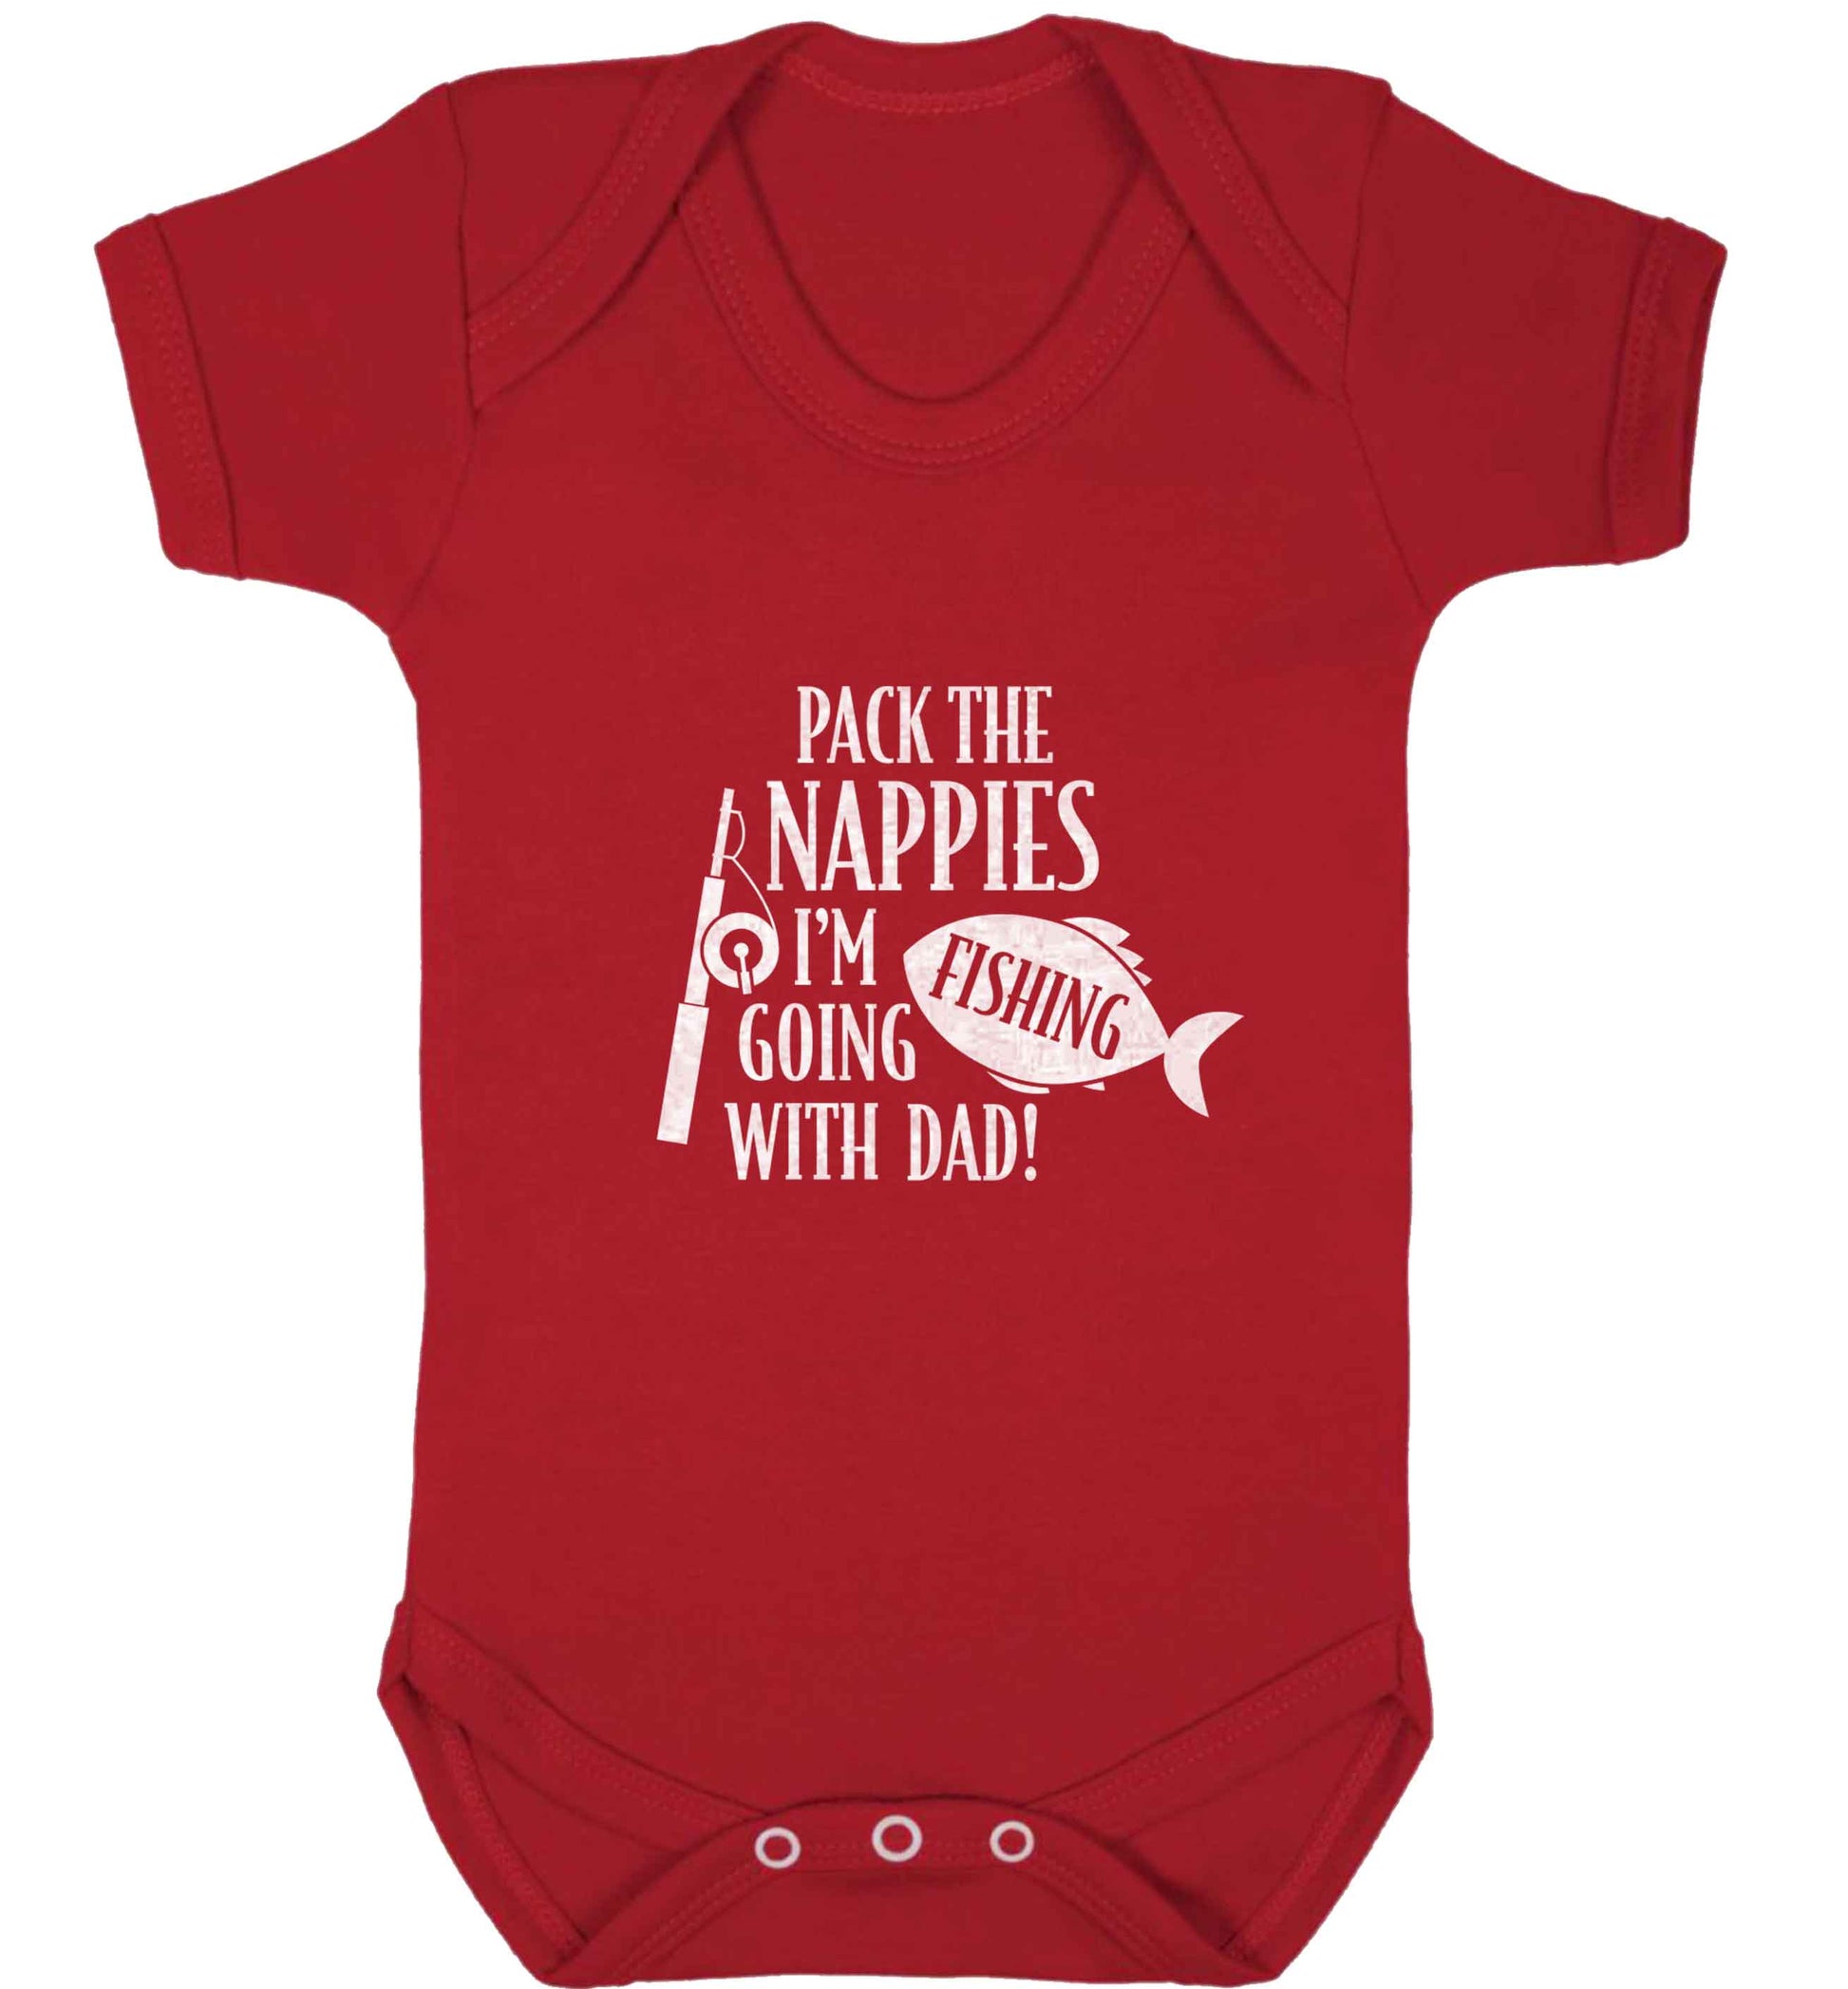 Pack the nappies I'm going fishing with Dad baby vest red 18-24 months